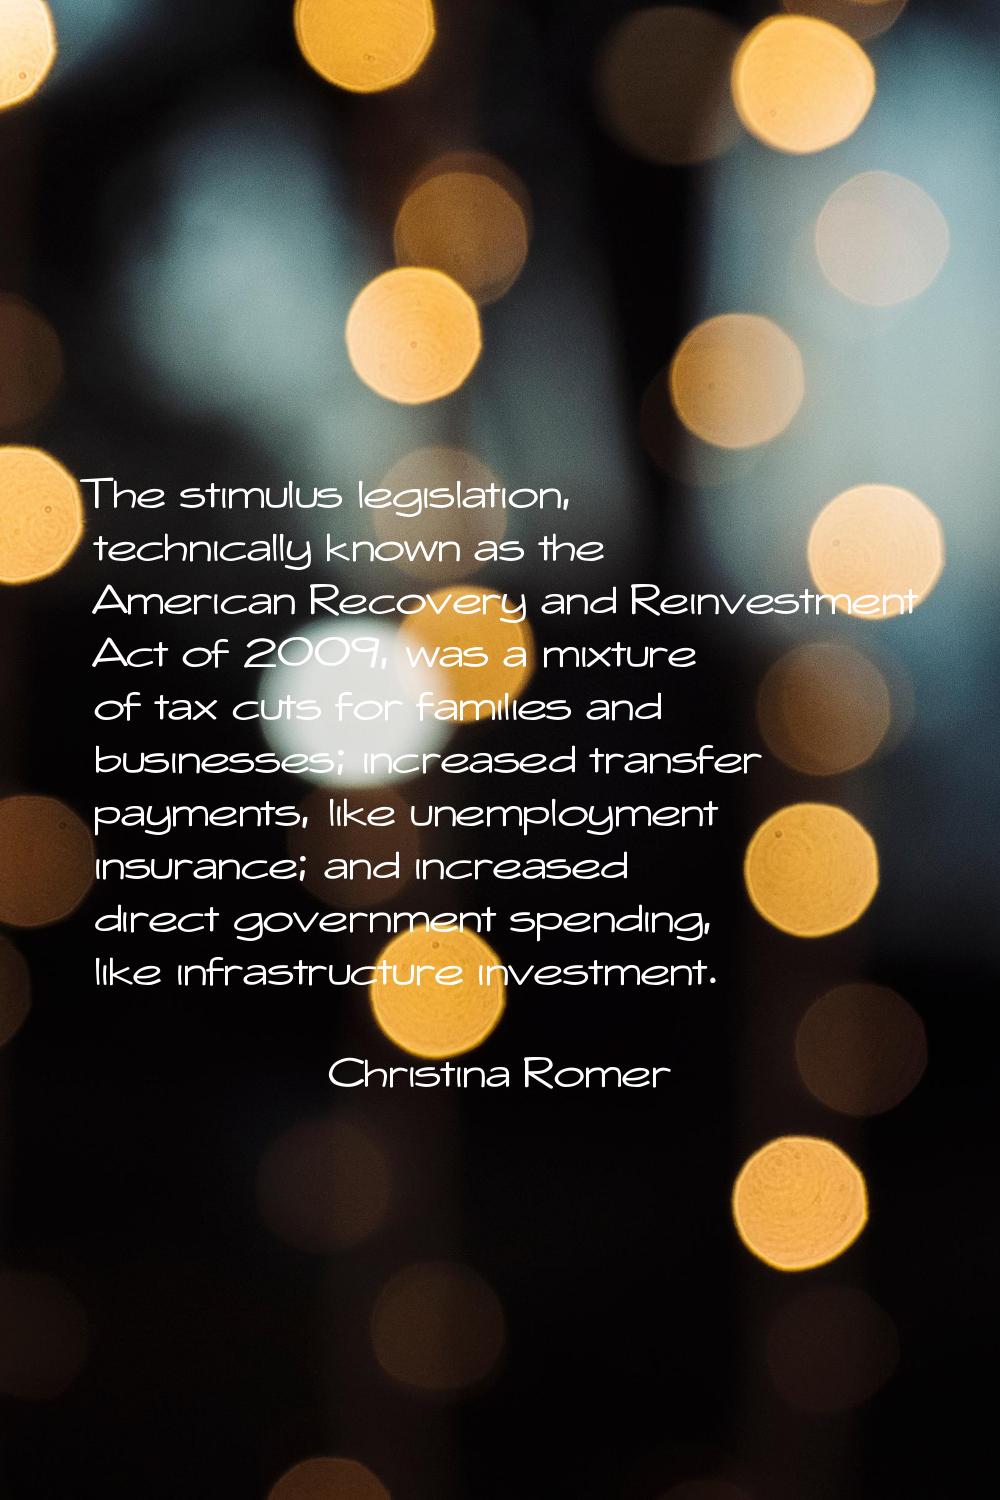 The stimulus legislation, technically known as the American Recovery and Reinvestment Act of 2009, 